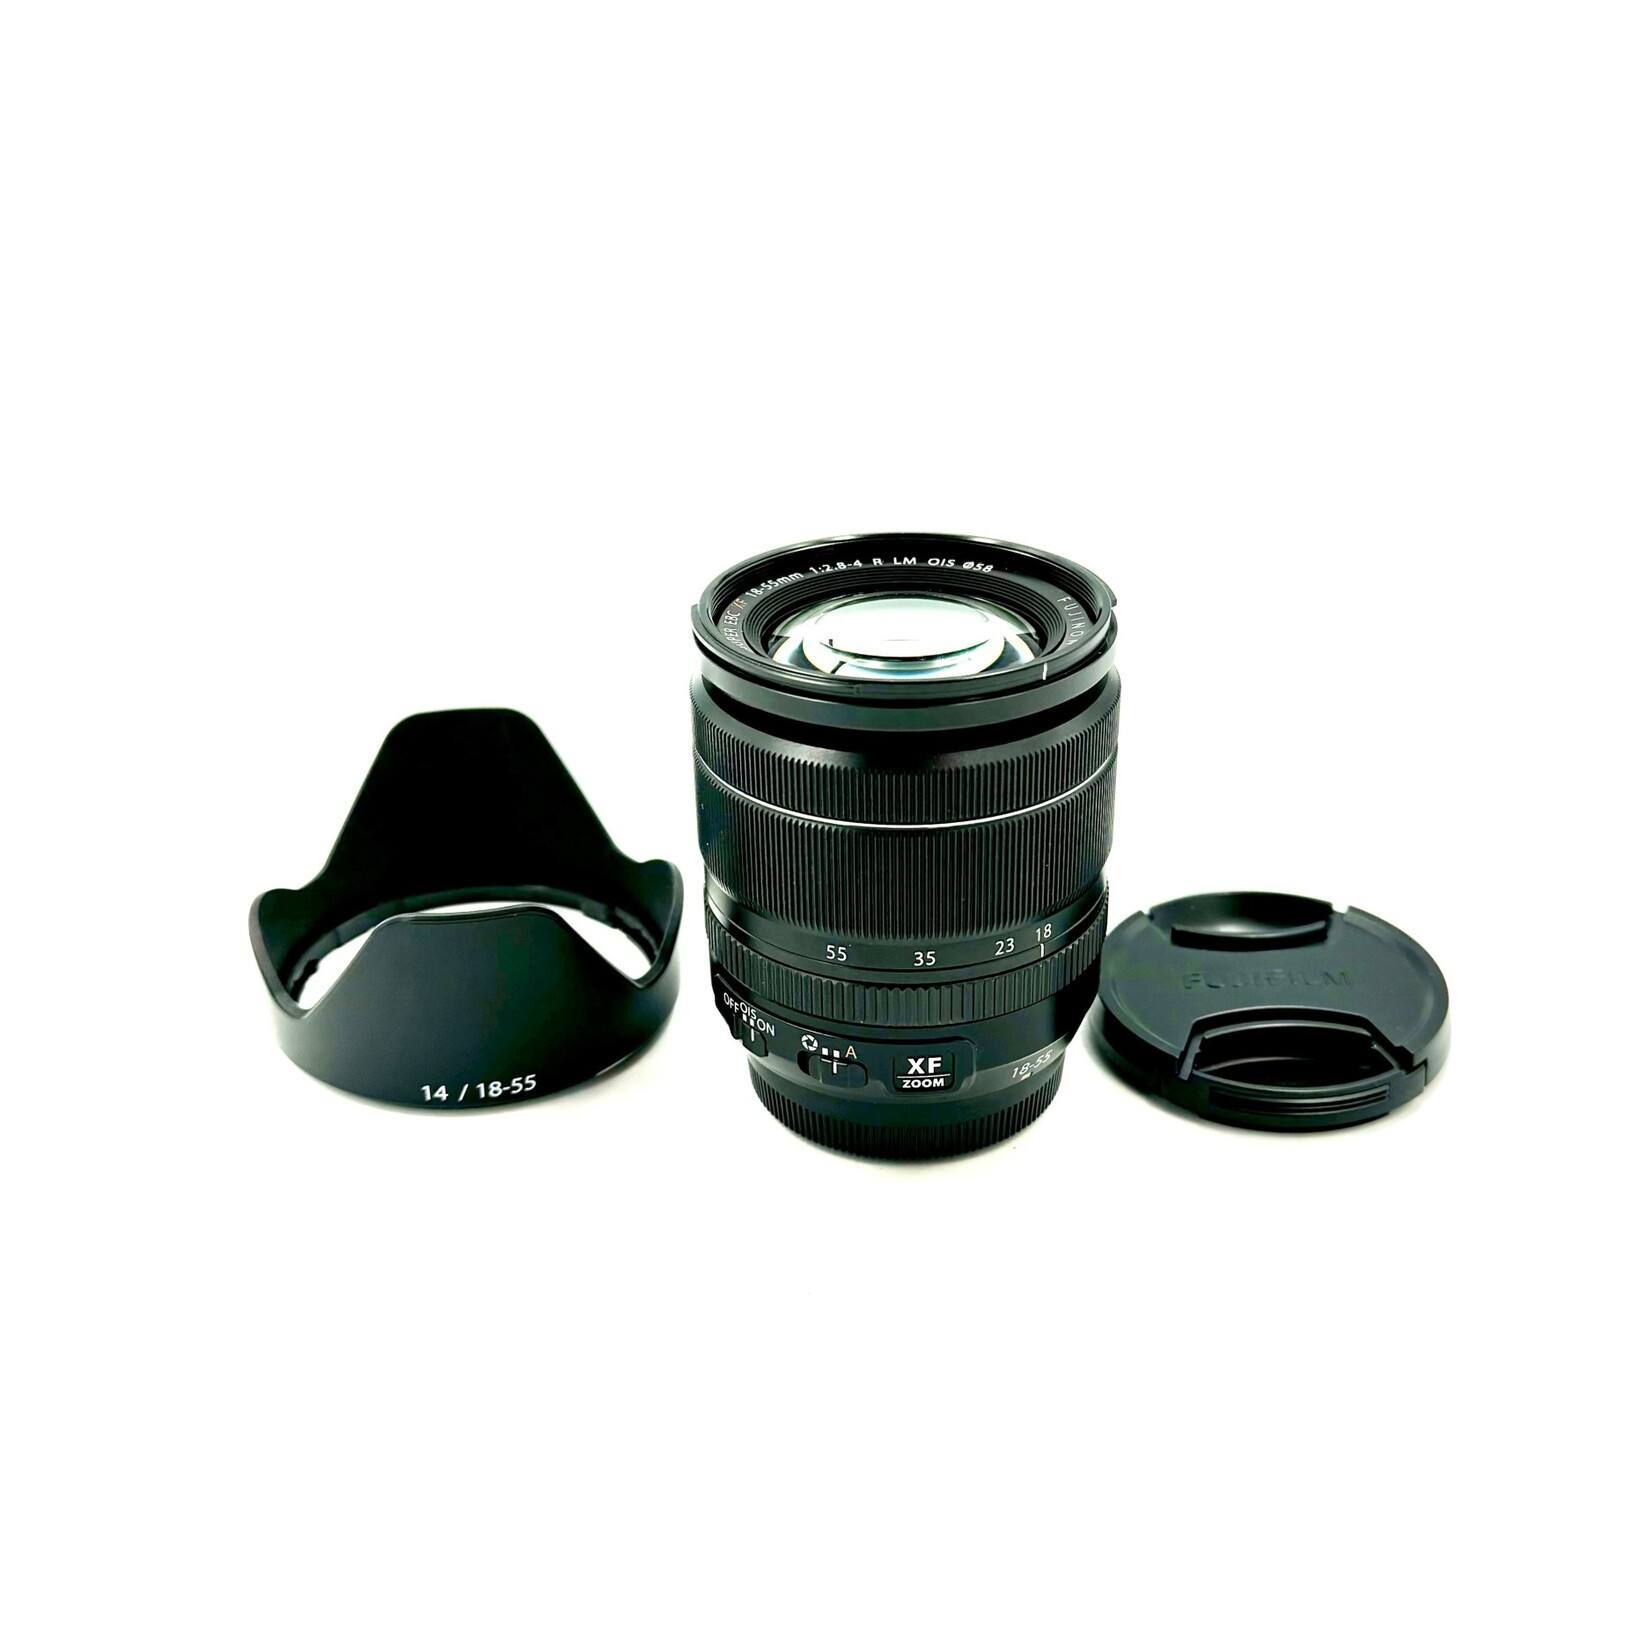 xf18-55mm 2.8-4 R LM OIS-